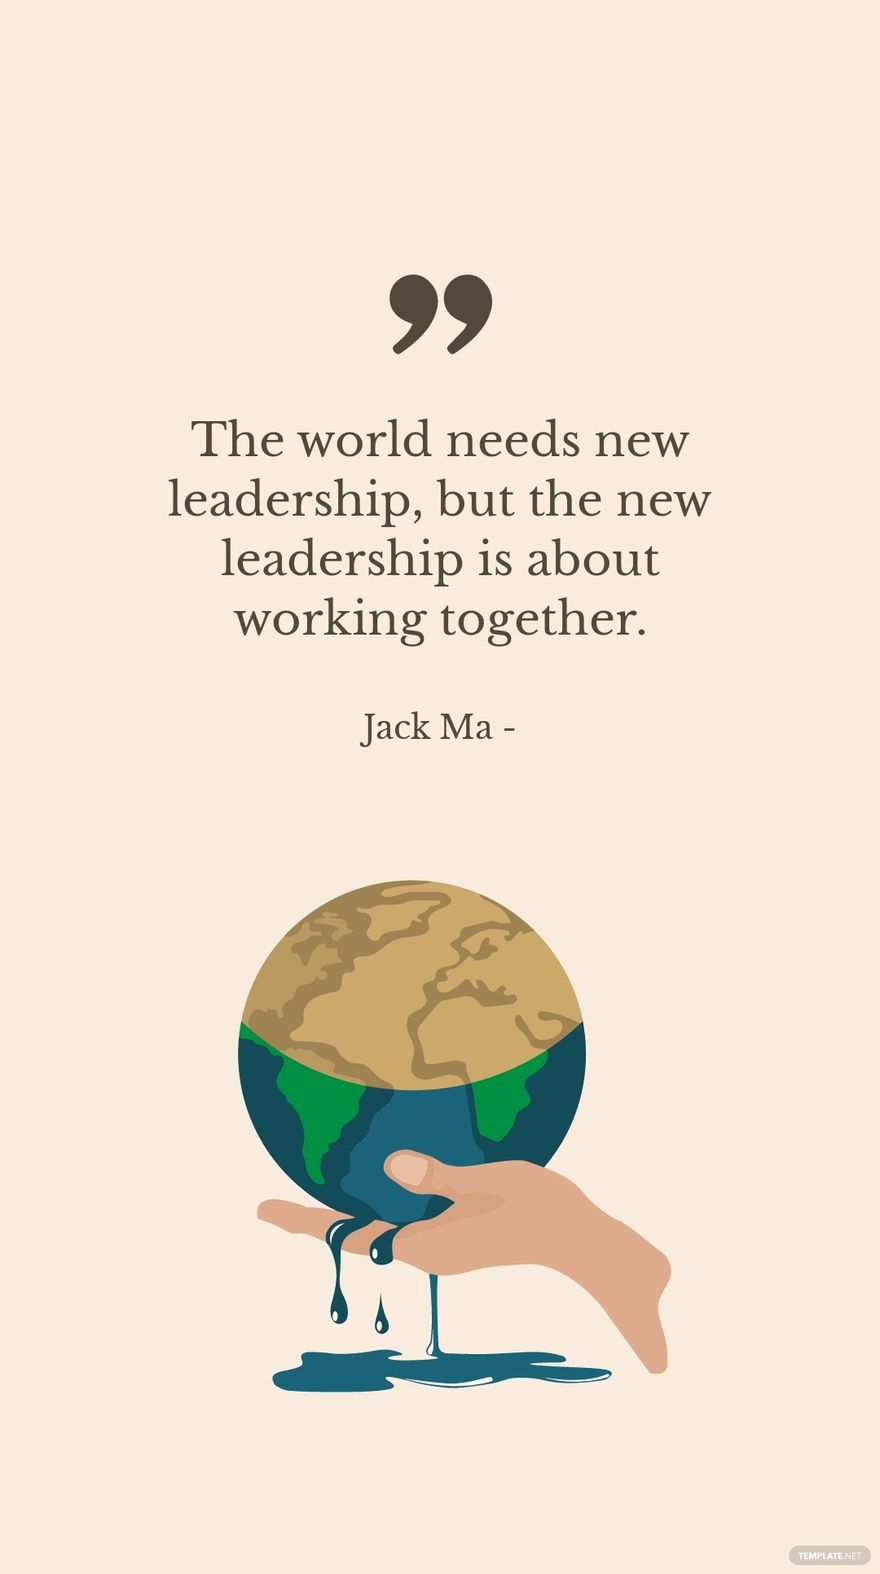 Free Jack Ma - The world needs new leadership, but the new leadership is about working together.